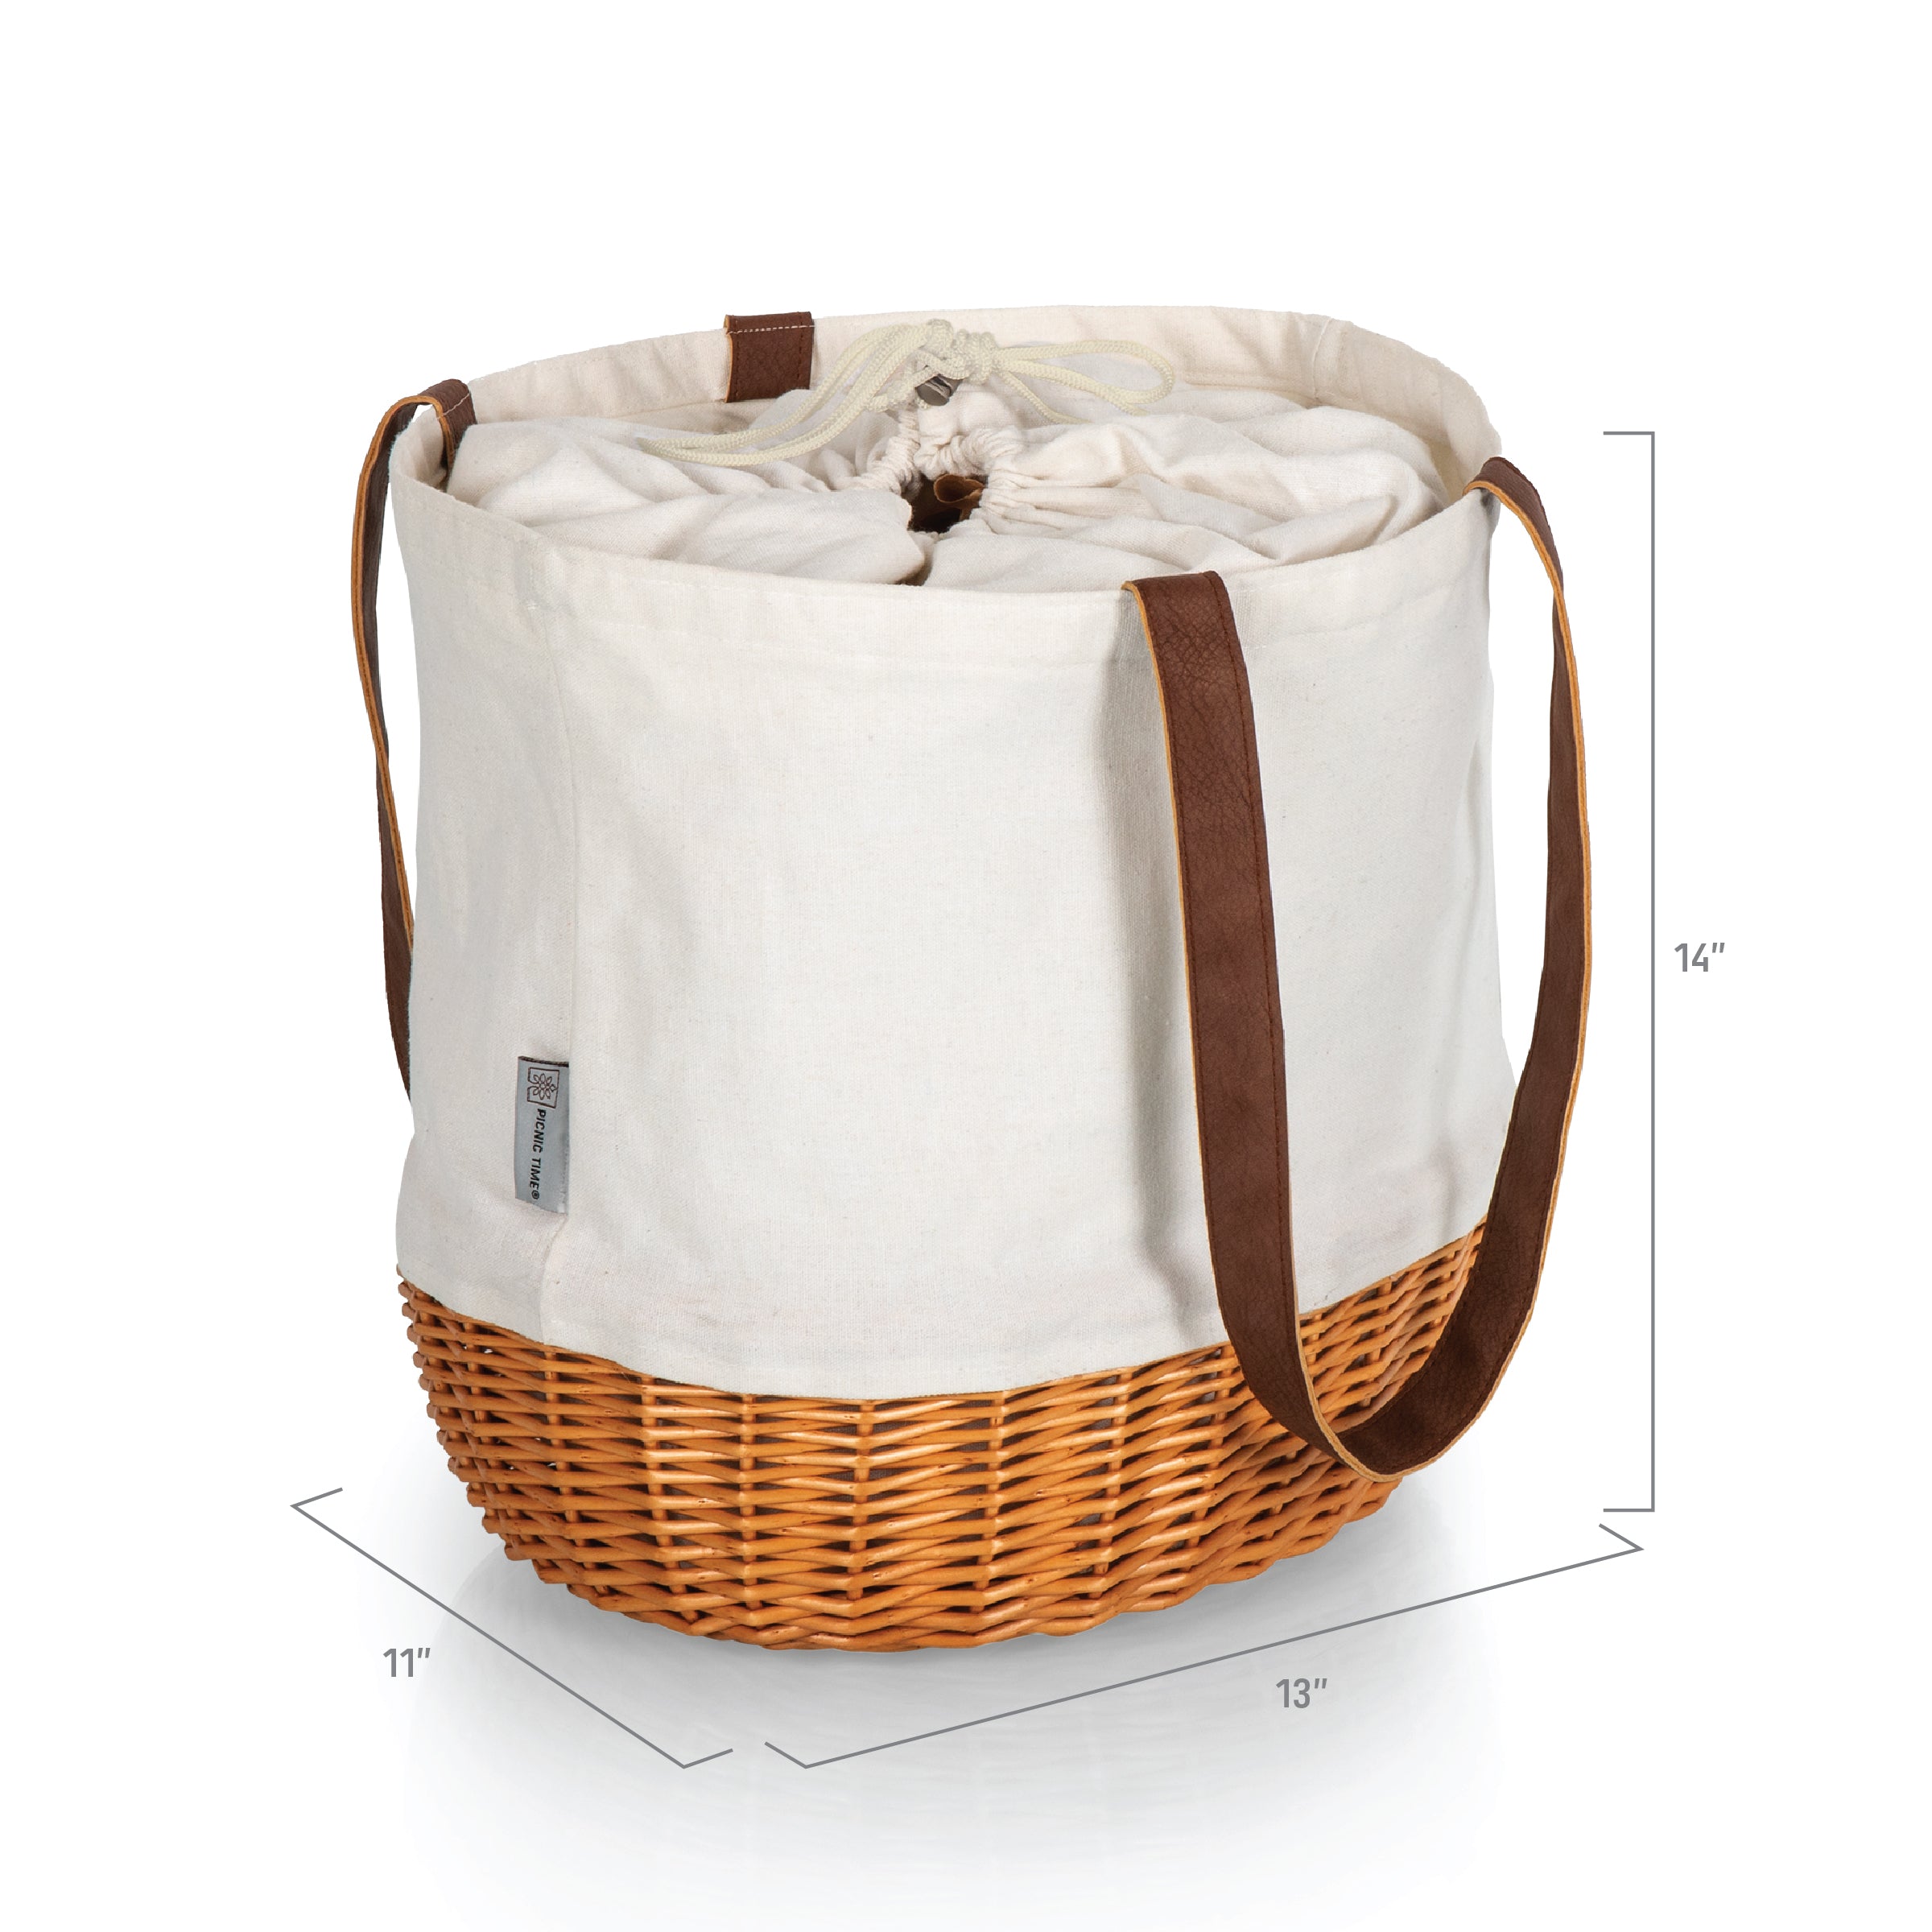 Boise State Broncos - Coronado Canvas and Willow Basket Tote